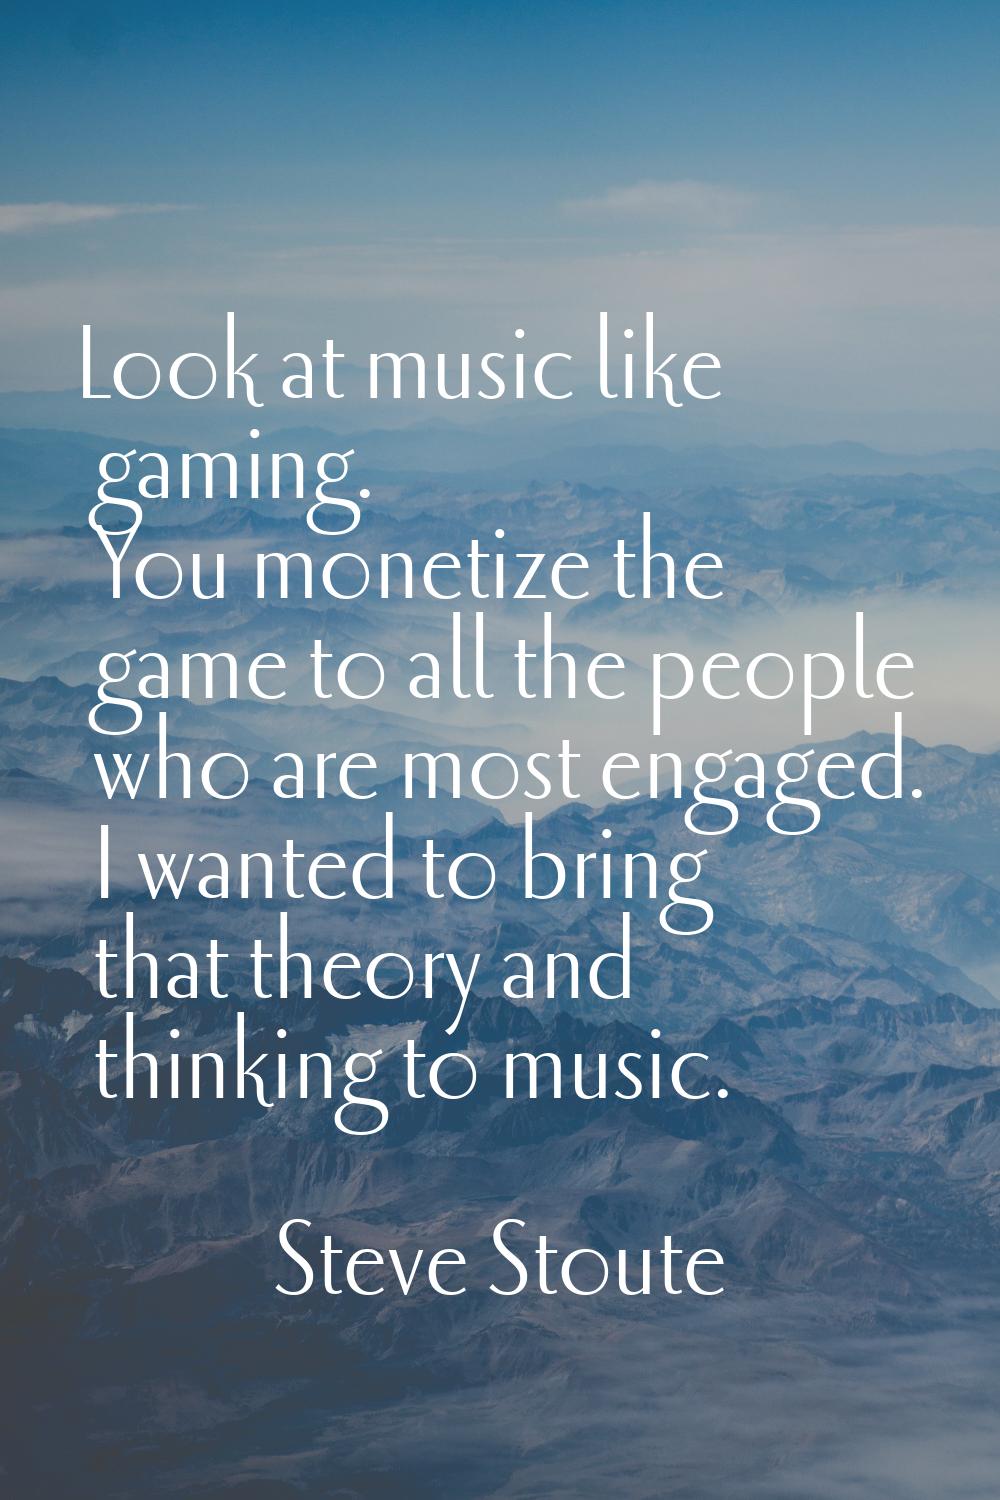 Look at music like gaming. You monetize the game to all the people who are most engaged. I wanted t